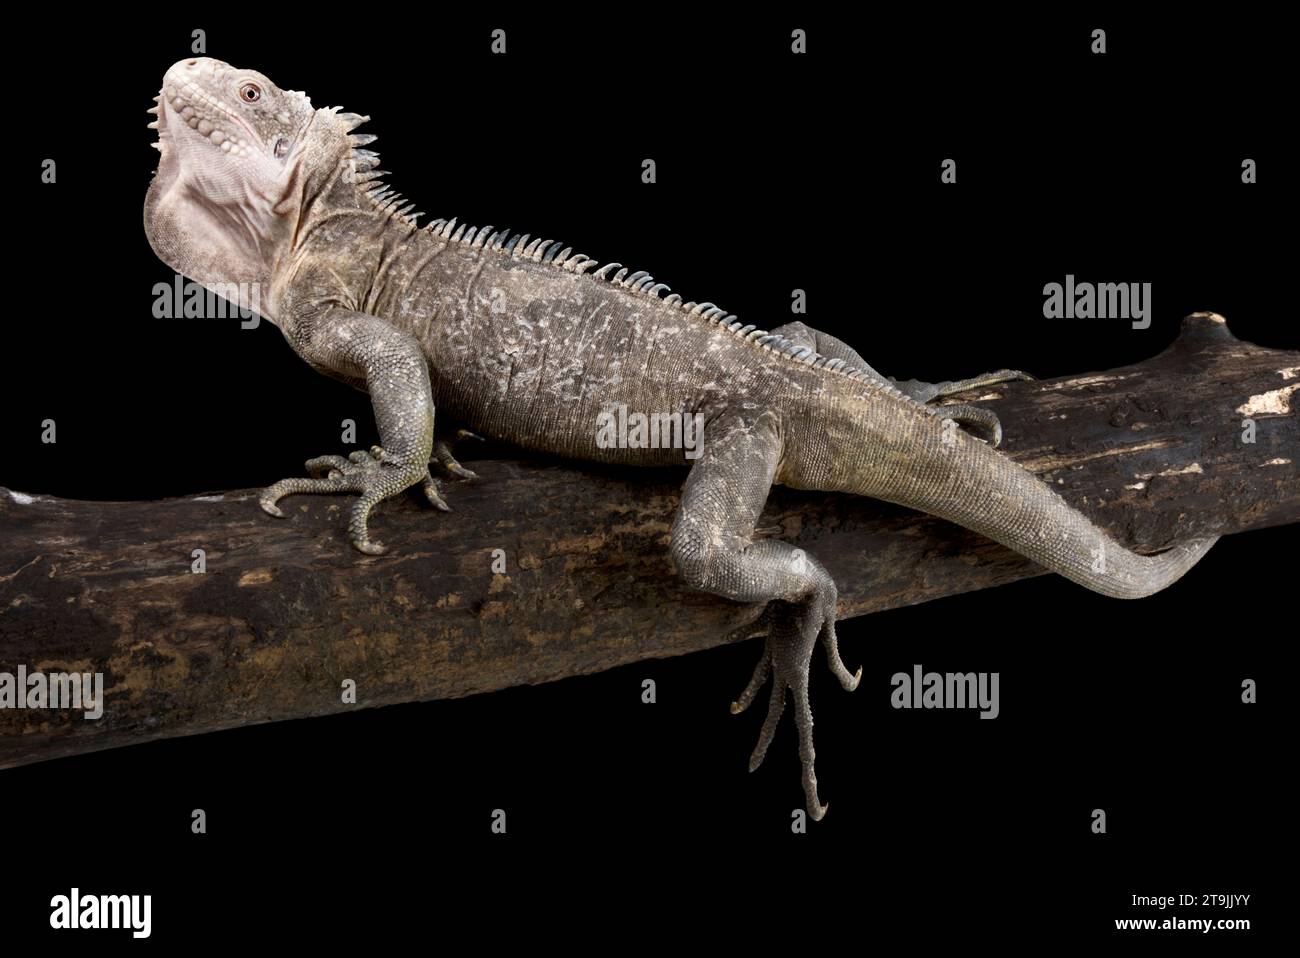 The Lesser Antillean Iguana (Iguana delicatissima) is a critically endangered reptile species endemic to a few remaining Antilles islands. Stock Photo